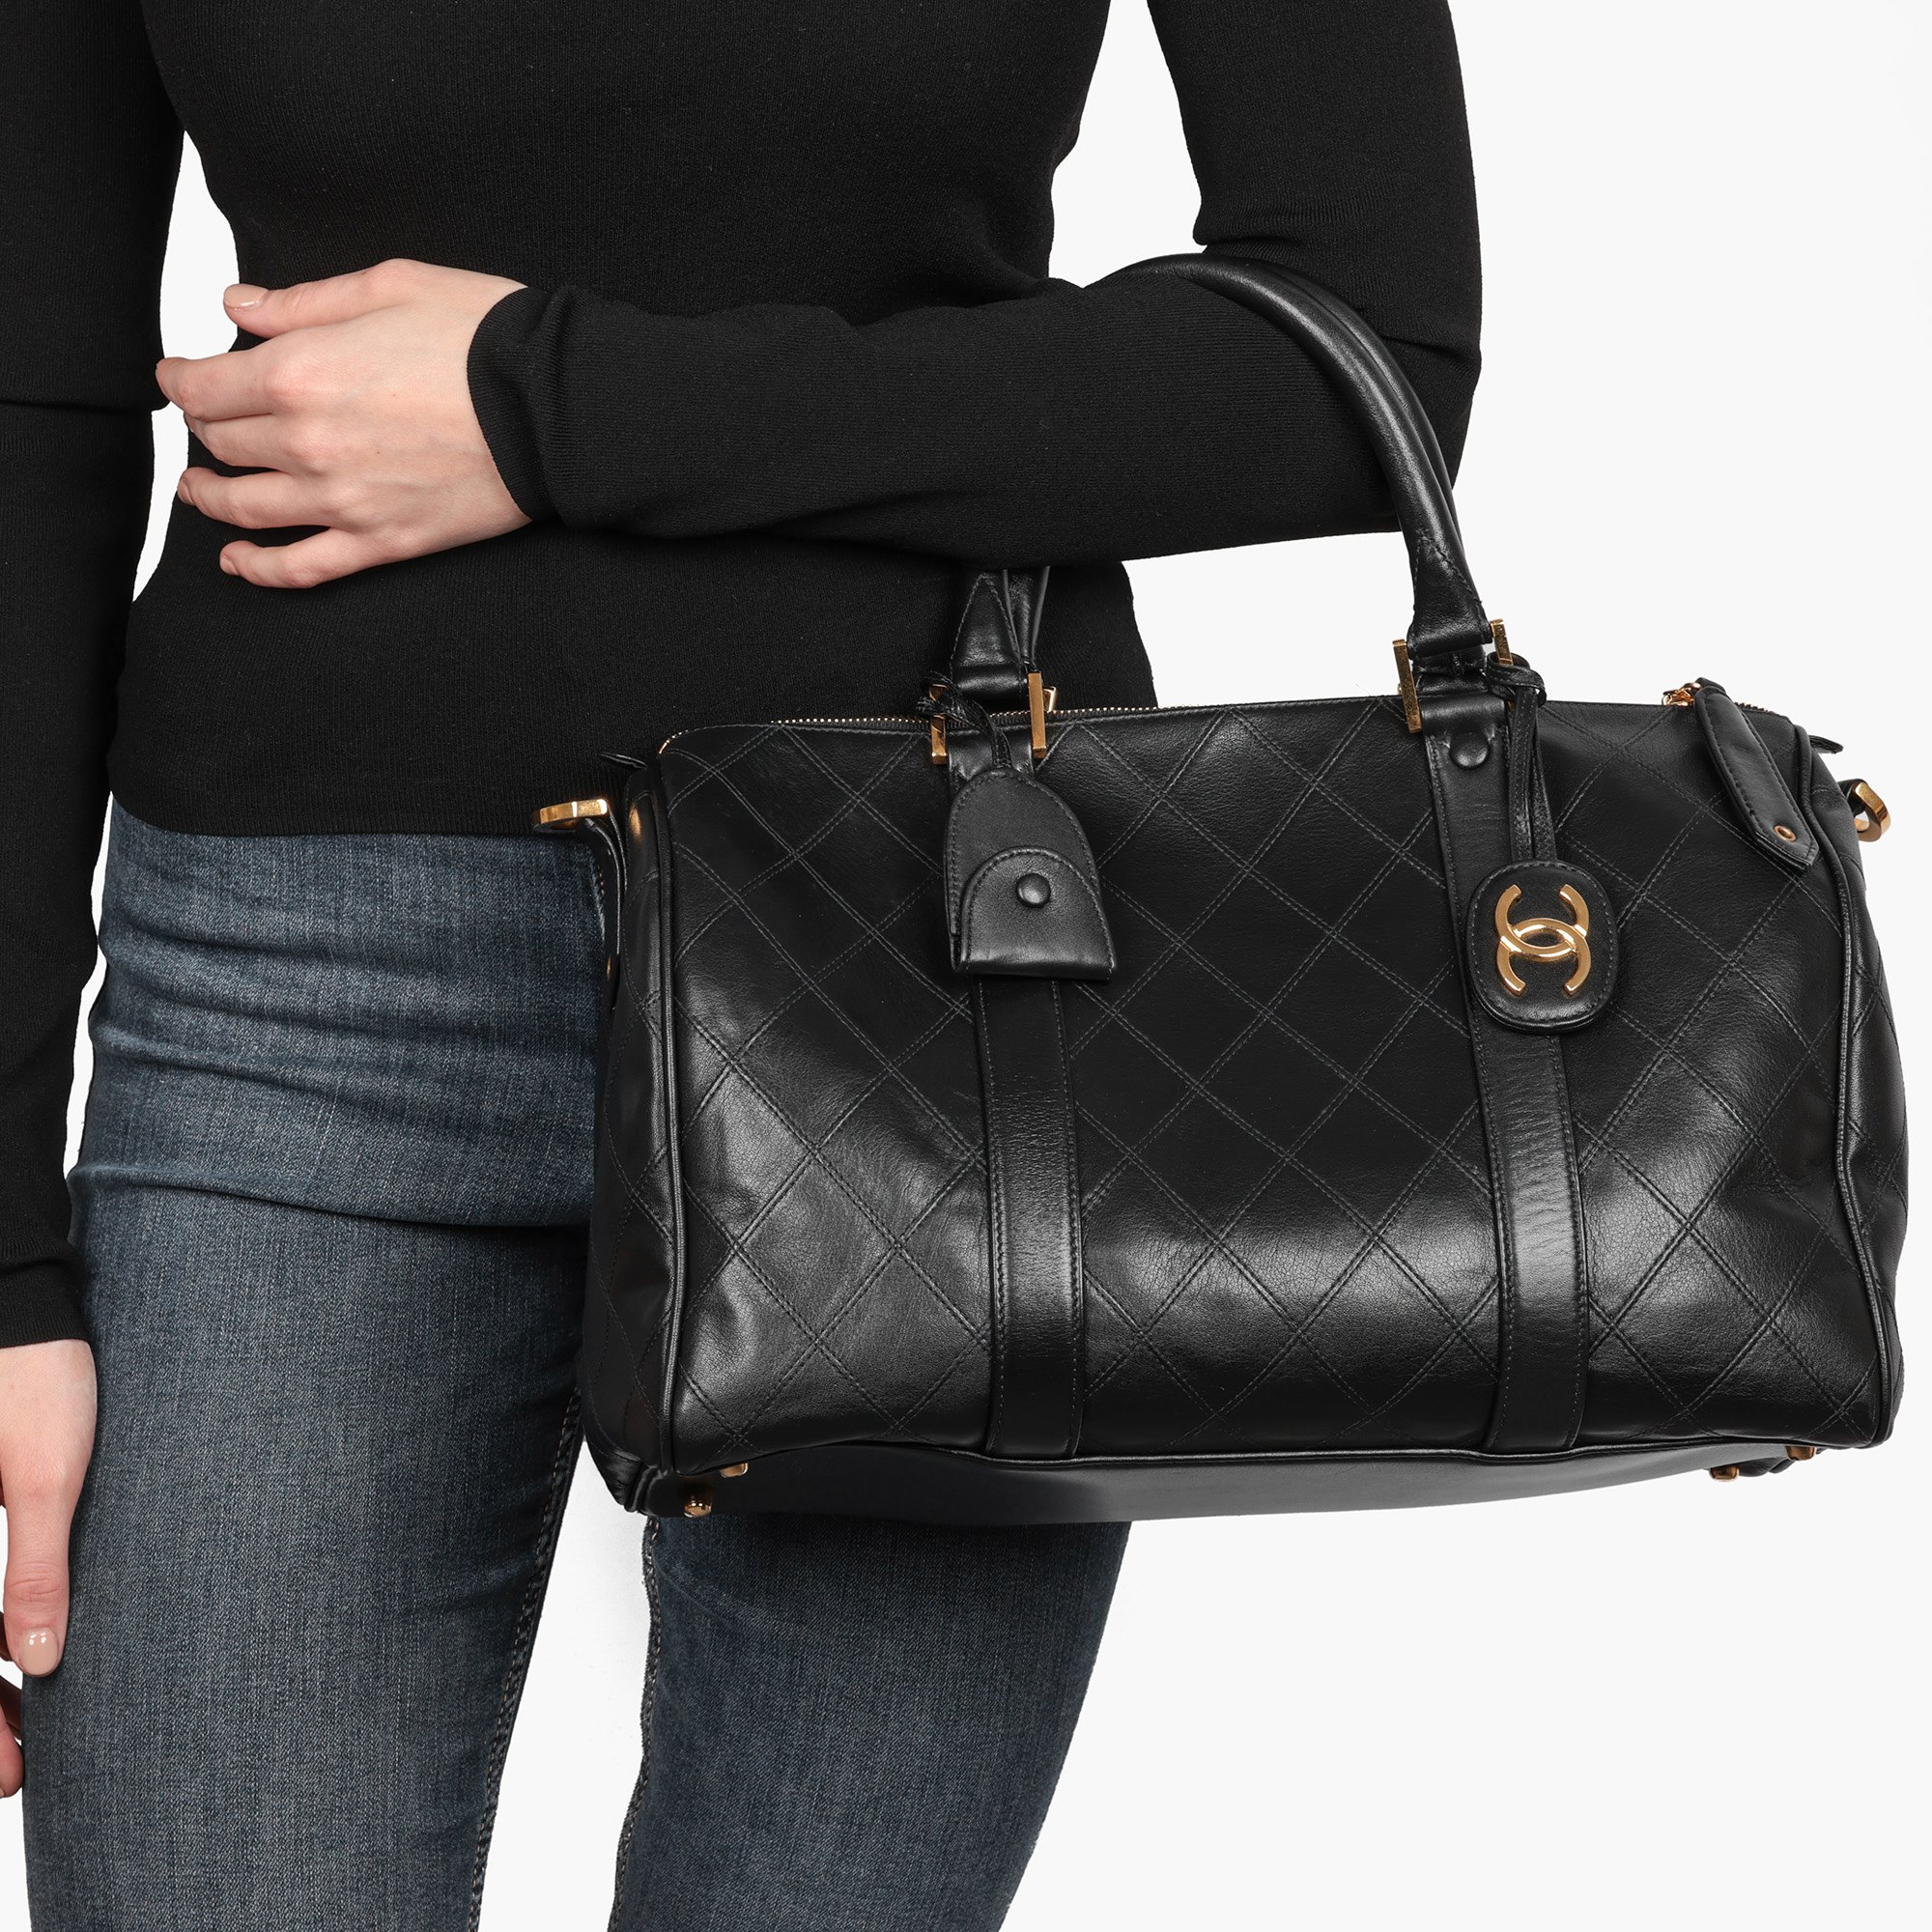 Chanel Black Quilted Lambskin Leather Boston 35cm